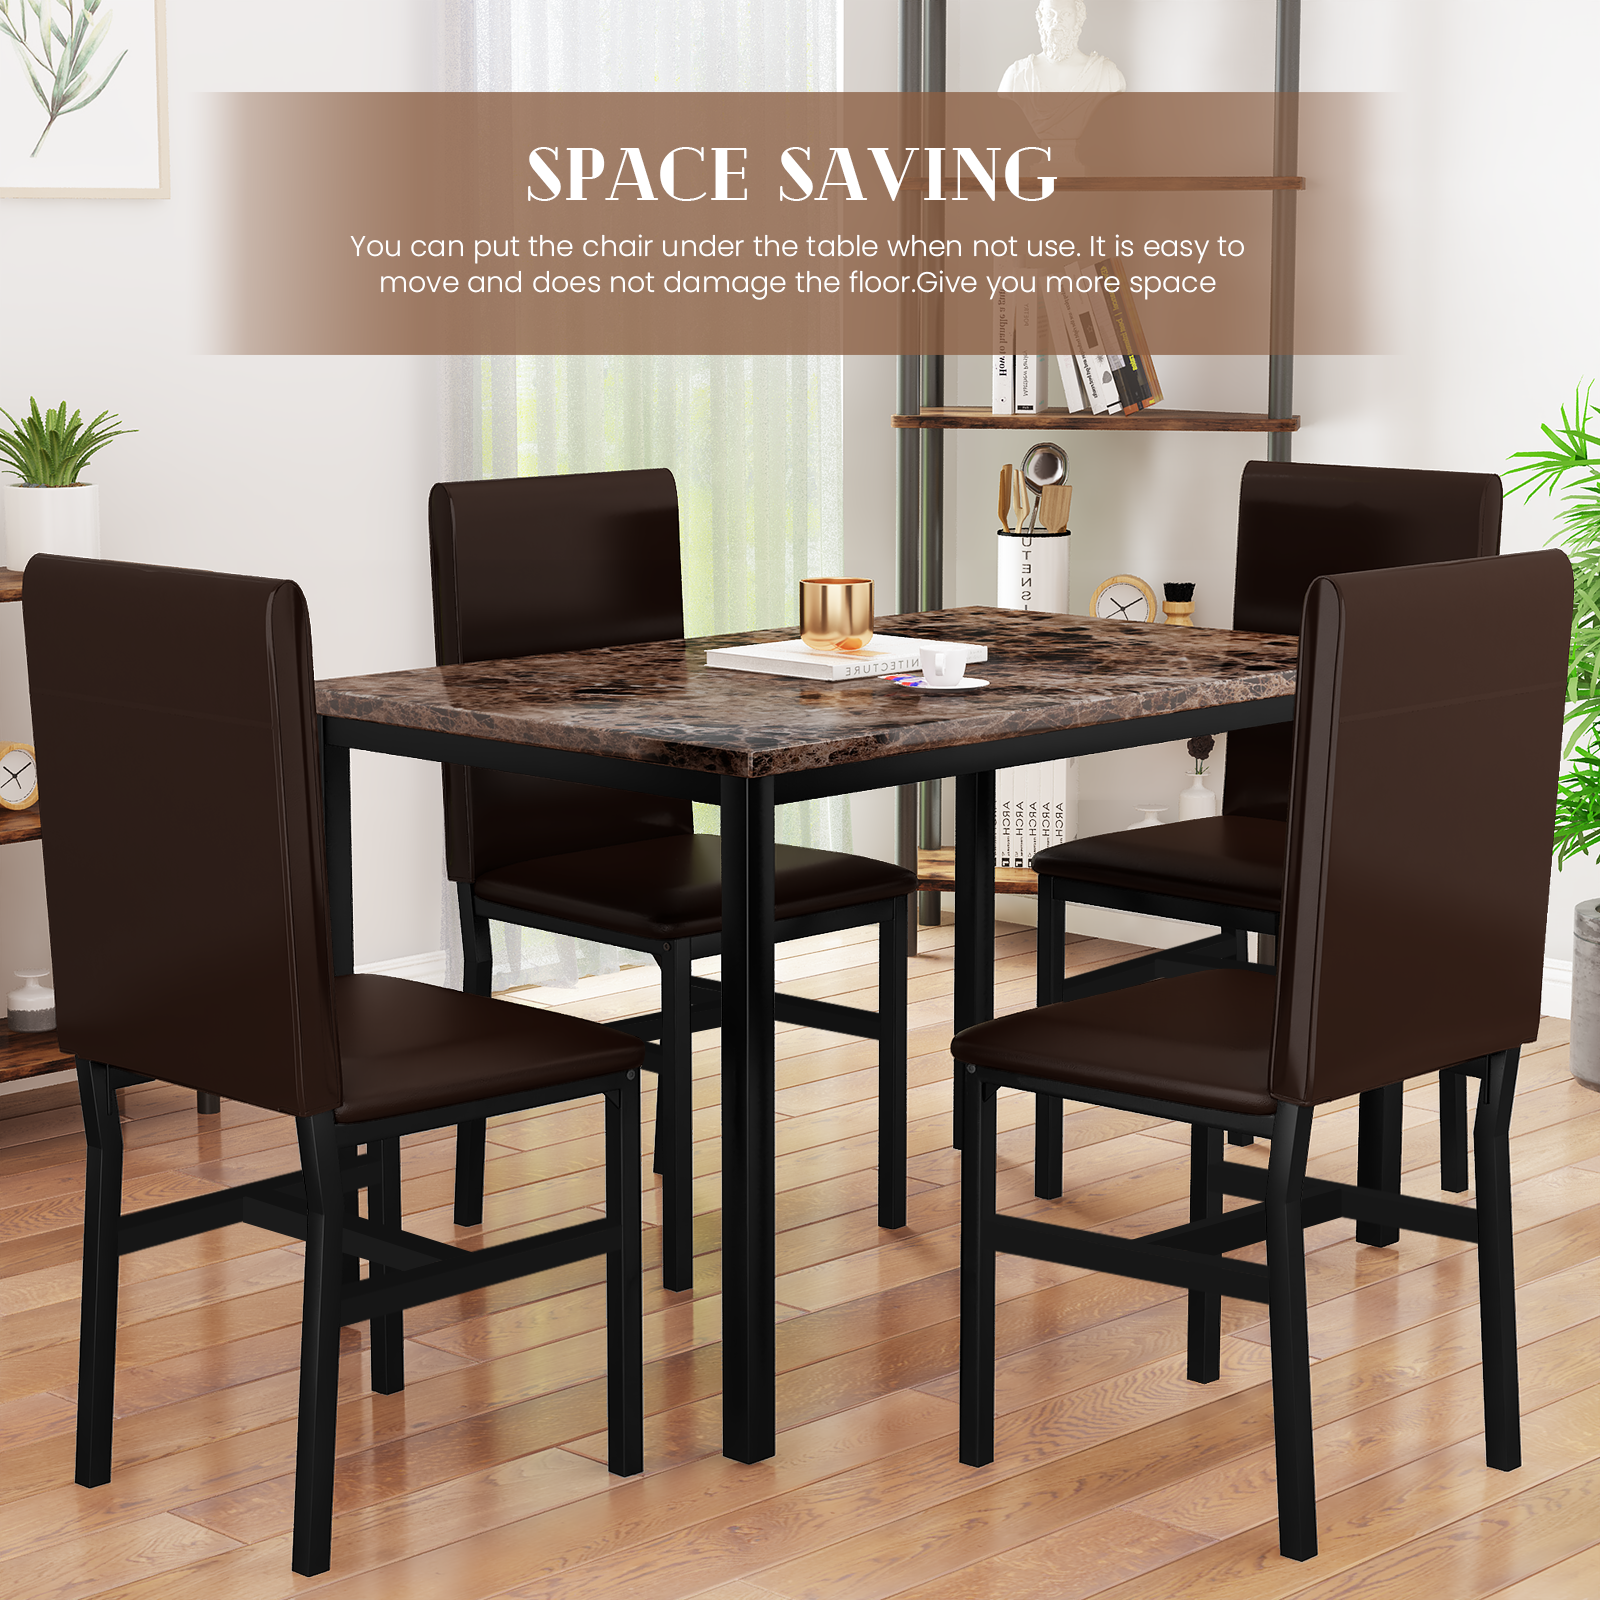 AWQM 5 Piece Dining Table Set for 4,Faux Marble Kitchen Table and Chairs for 4, Dining Room Table Set with Chairs, Brown